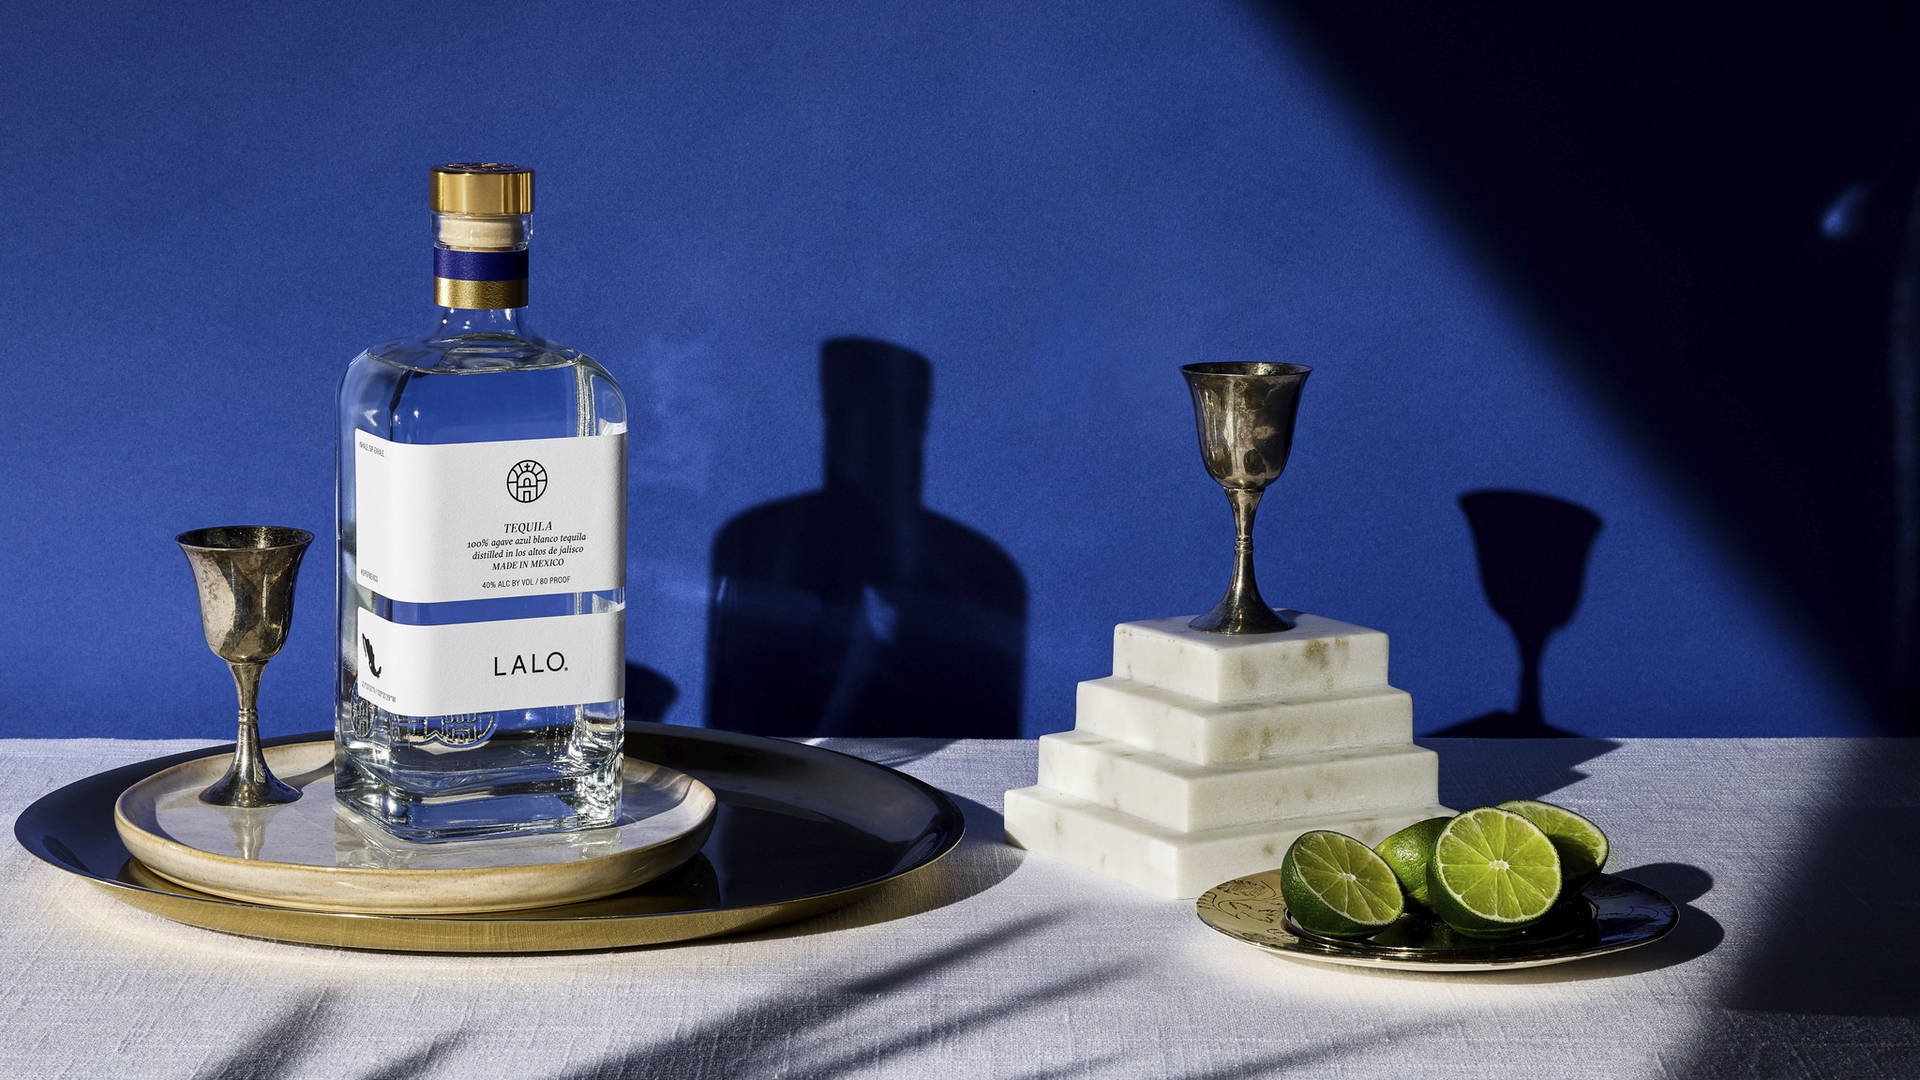 LALO Tequila On Blue Background Wallpaper